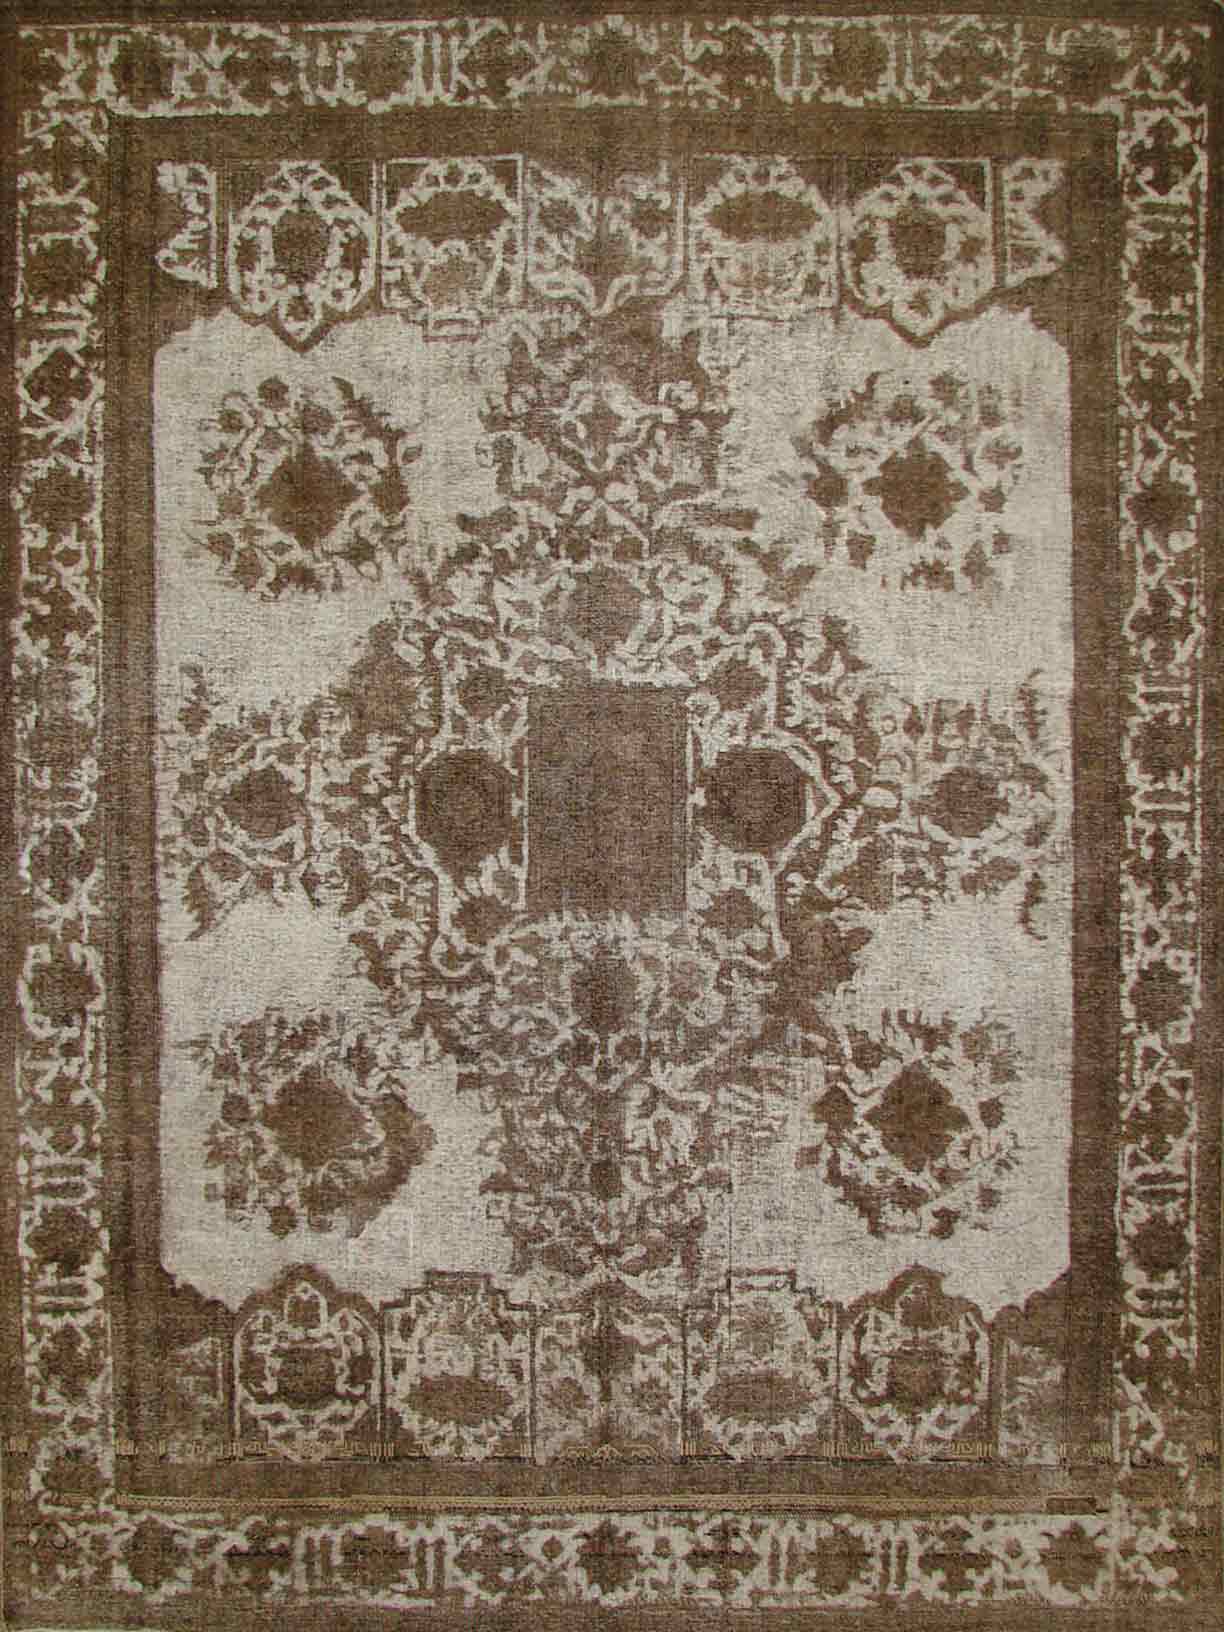 Antique Style Rugs VINTAGE 19271 Ivory - Beige & Camel - Taupe Hand Knotted Rug